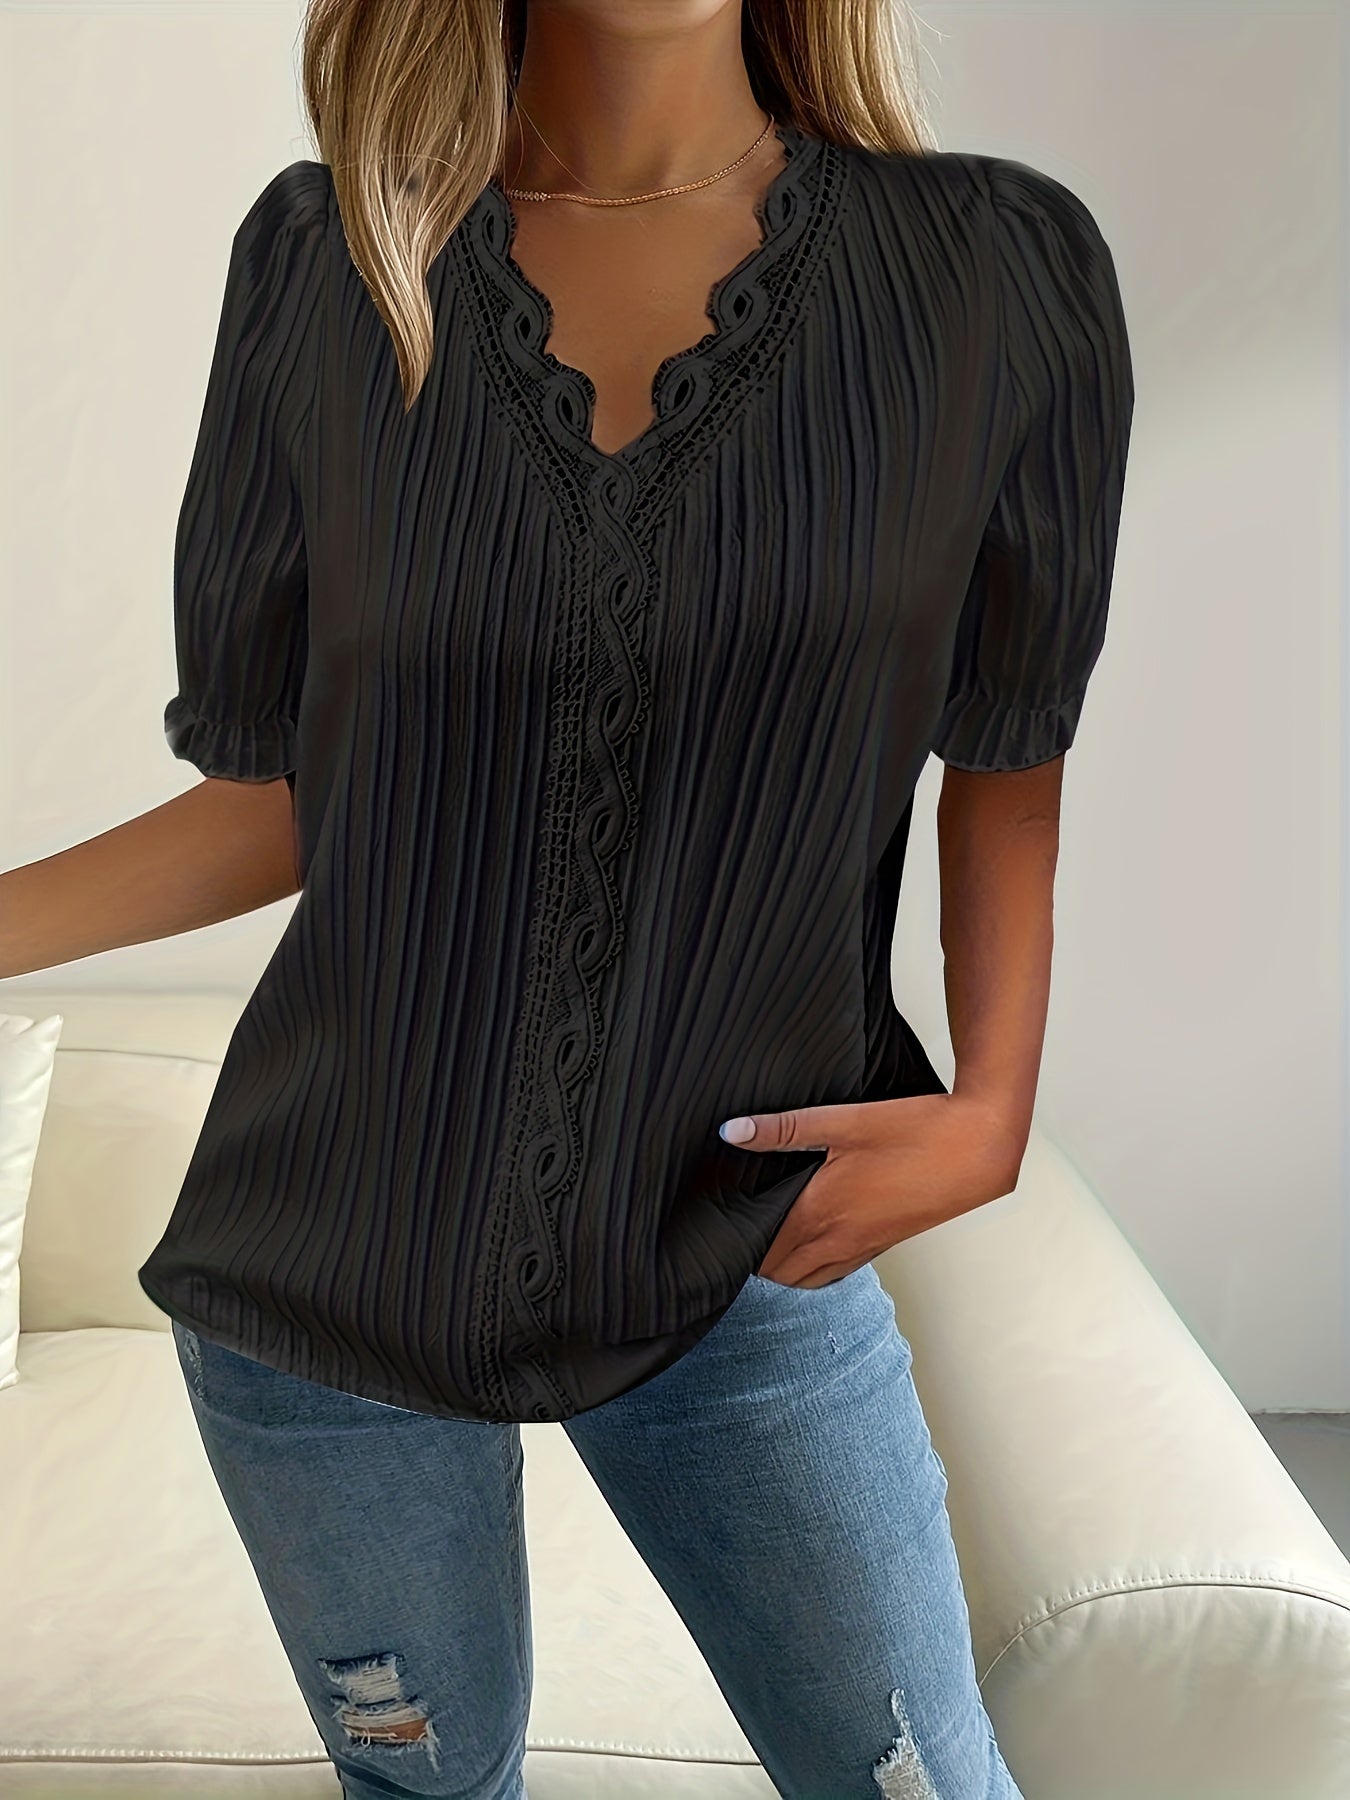 Plus Size Elegant Blouse, Women's Plus Solid Contrast Lace Ribbed Puff Sleeve V Neck Shirt Top